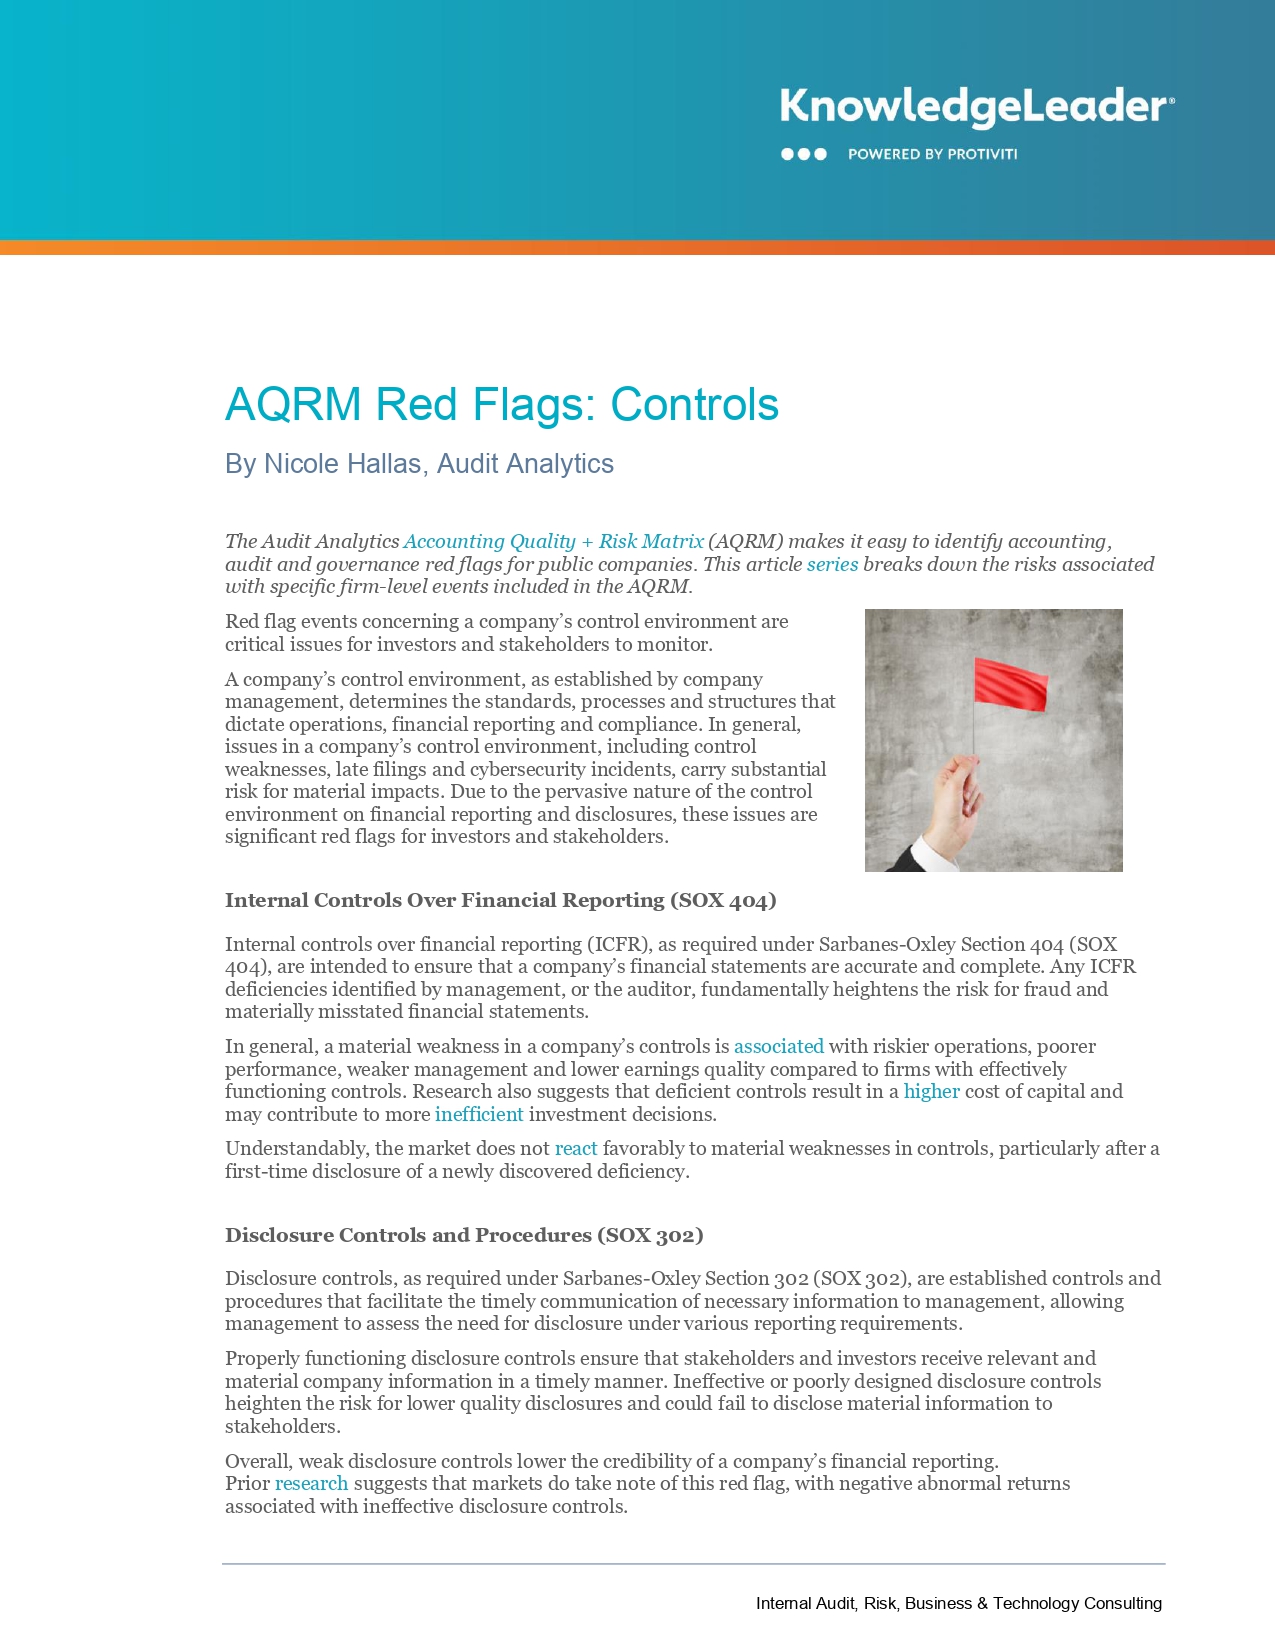 Screenshot of the first page of AQRM Red Flags: Controls